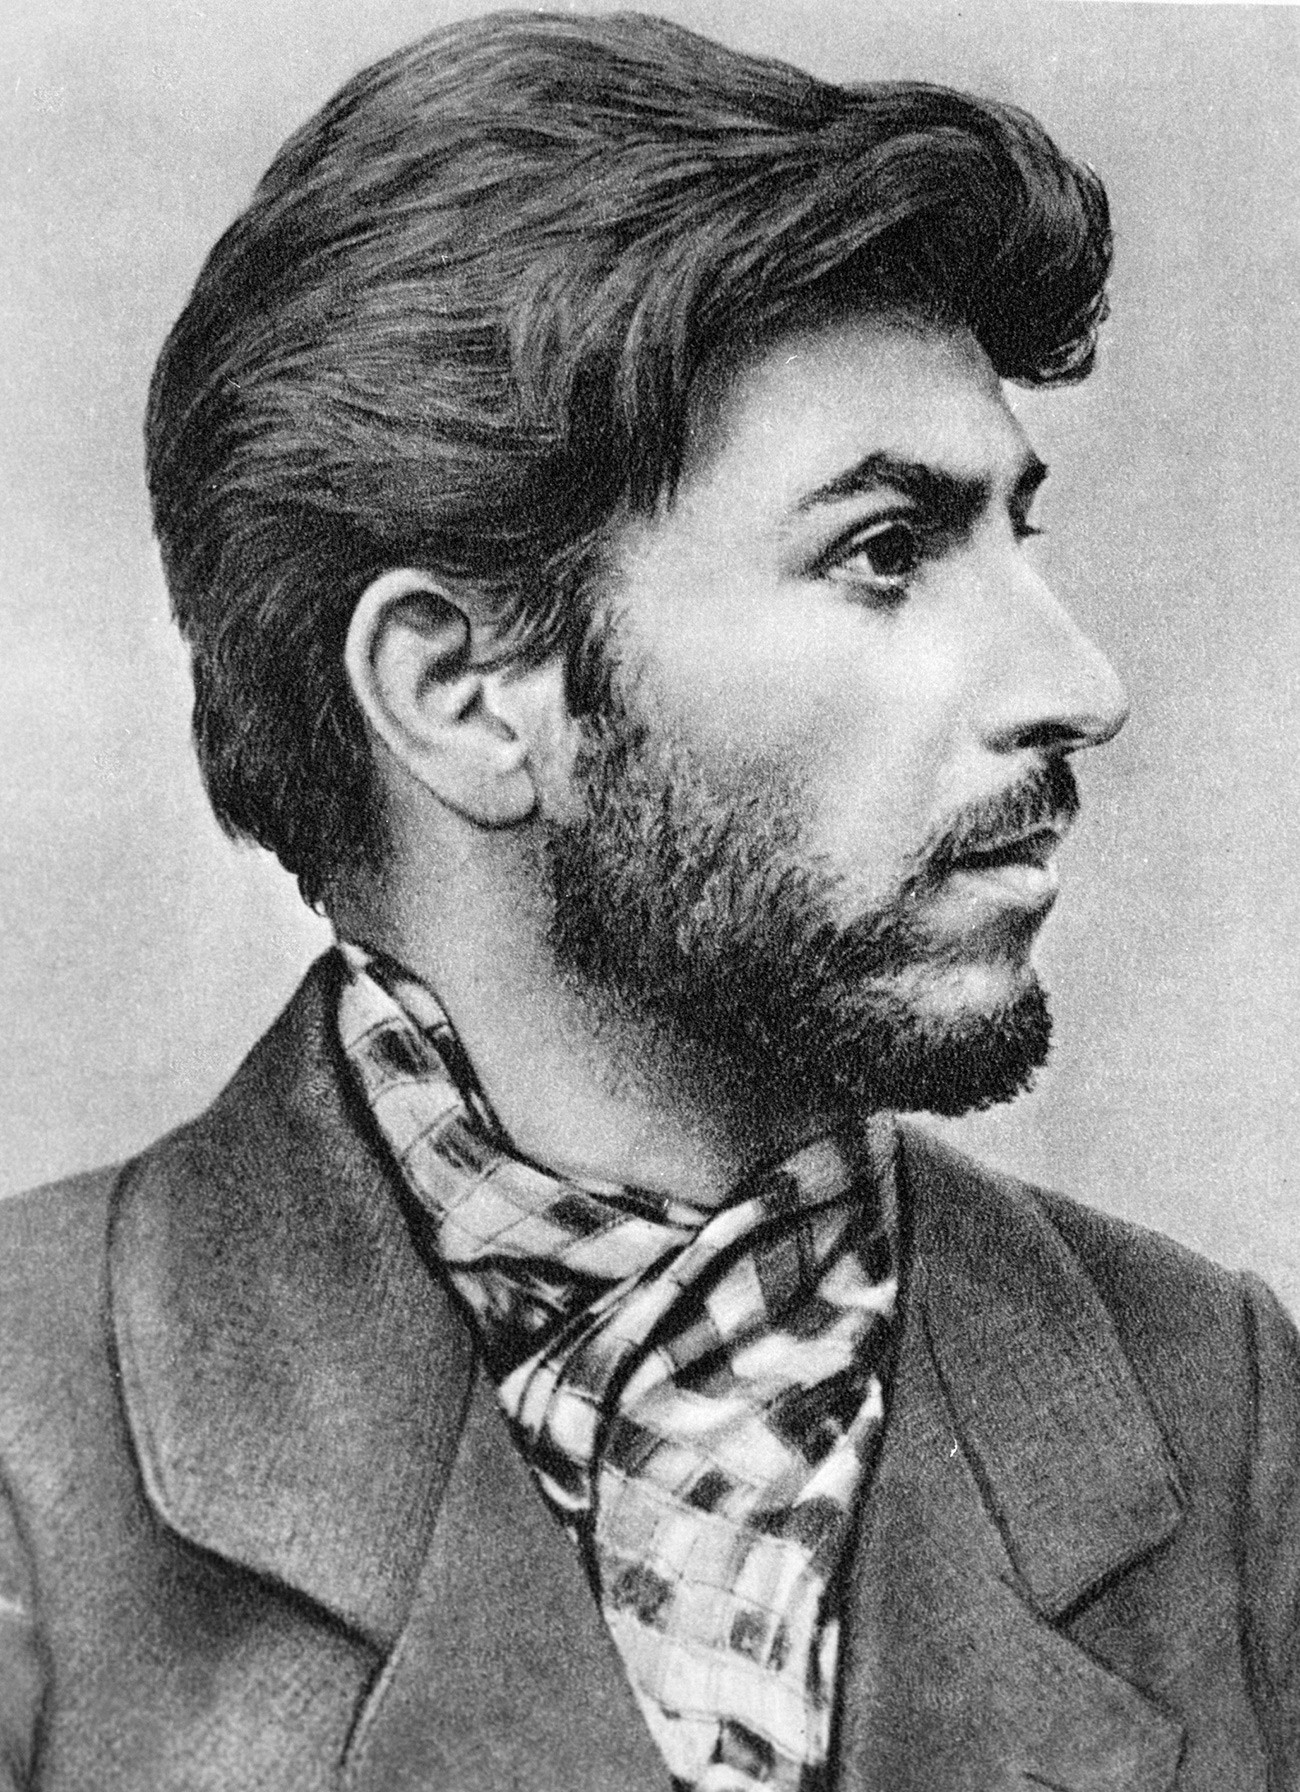 Stalin in his younger years.